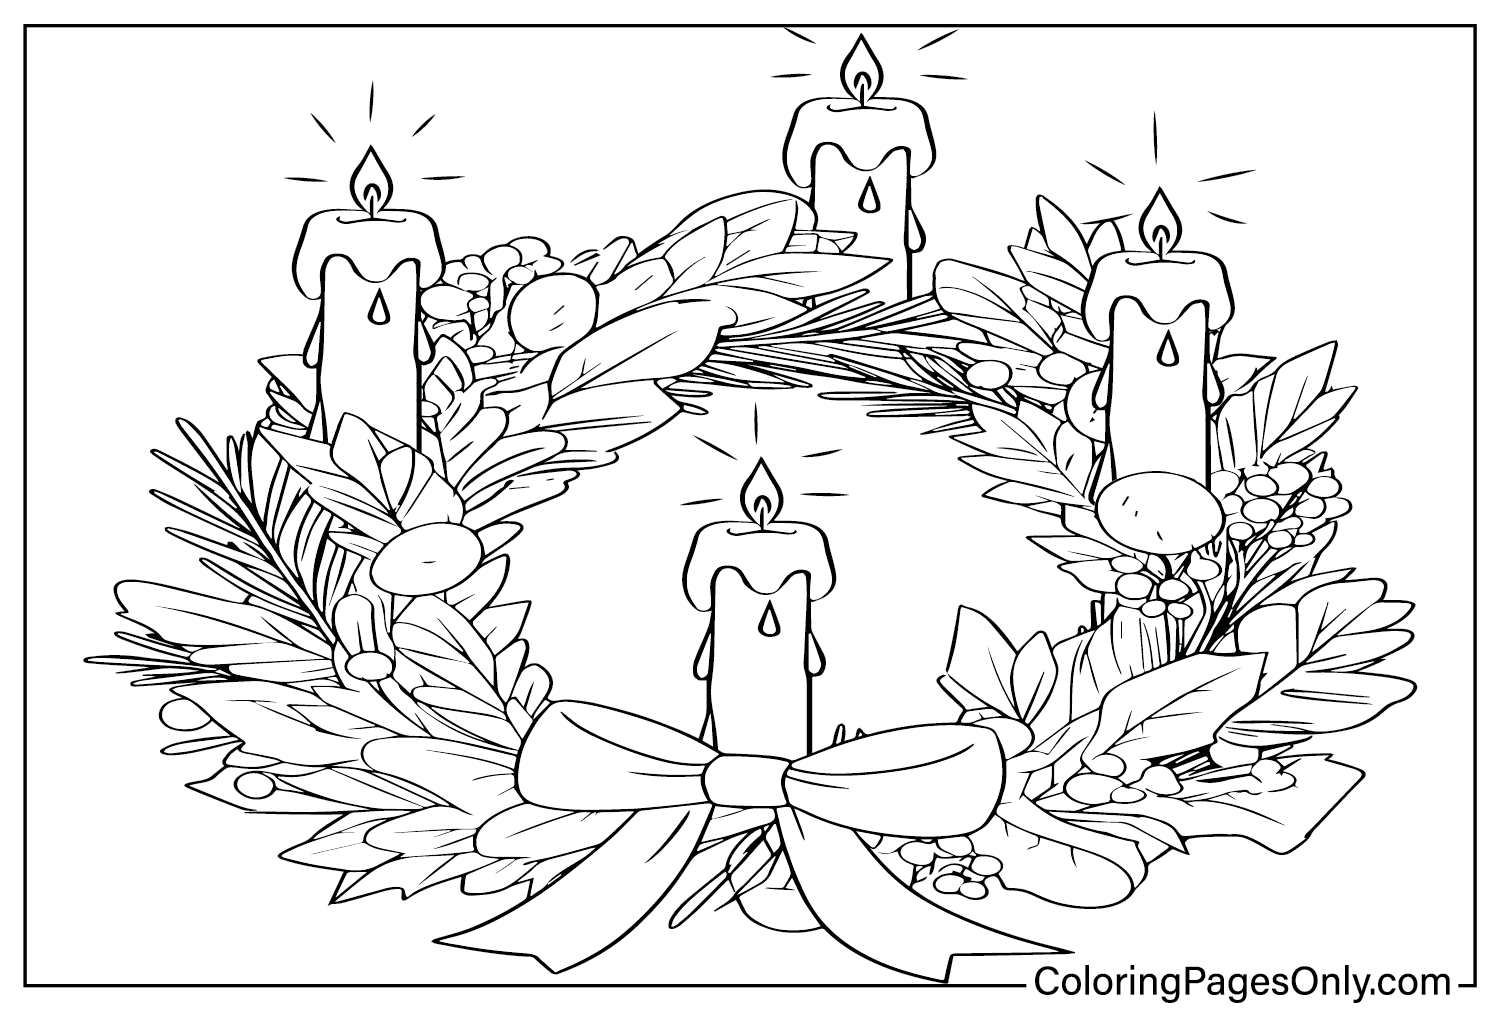 Advent Wreath Coloring Page PDF from Advent Wreath